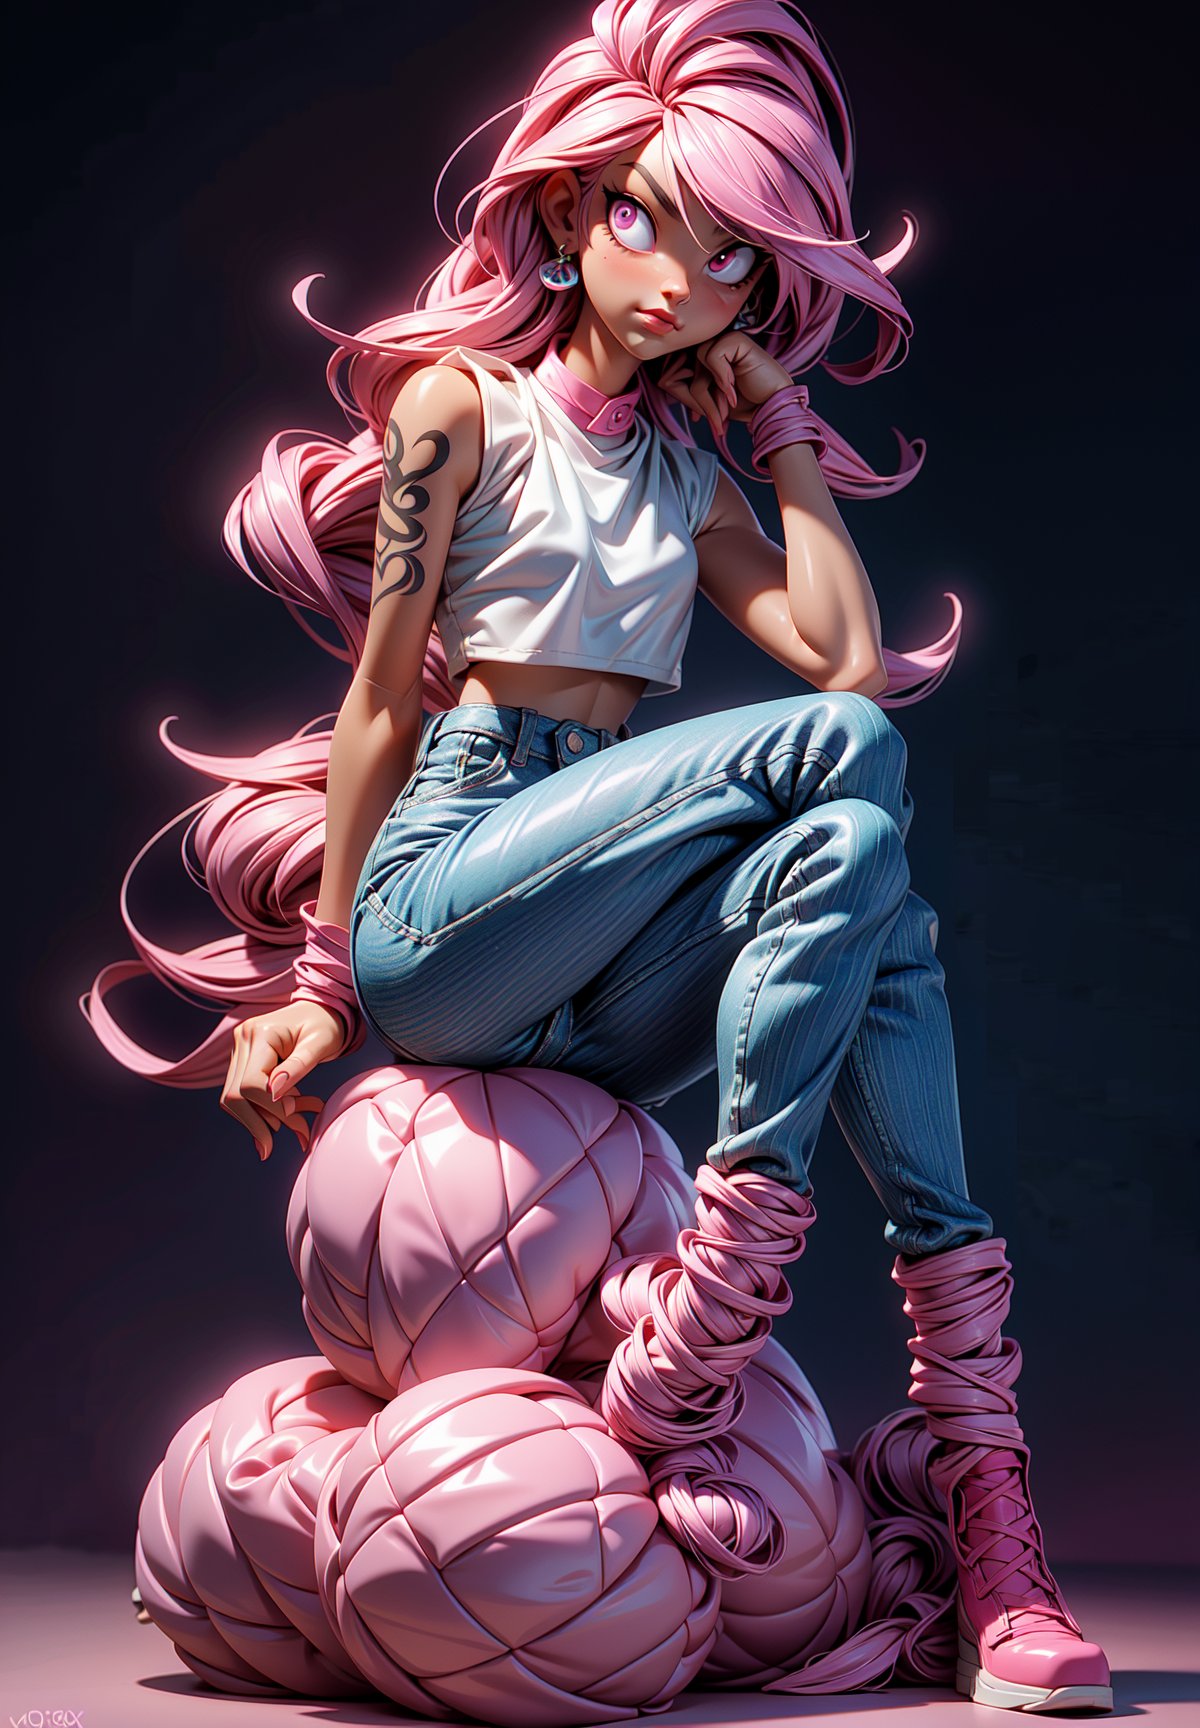 Pink Eyes, pink Eyes, pink pants, drawing, painting on paper, inks, ink pots, pink shelf((Masterpiece)), (Best Quality), Art, Highly Detailed, Extremely Detailed CG Unity 8k Wallpaper, (Curves: 0.8), (Full Body: 0.6), 3DMM, (Masterpiece, Best Quality) pink hair, long curly hair, tanned skin, tanned skin, pink eyes, sitting, white sleeveless shirt, no bra, small chest, tattoos, tattoo on the arm, sitting, drawing, jeans, black pants, cartoonist, tattoo studio , white walls, neon pink lights, neon lights, pink lights, wooden pink gradient shelf, flower pots, plants, decorative plants, window, window, city view, tattoo chair, tattoo artist, tattoo girl, 12334, Q , perfect eyes,12334,3DMM,facial,anime